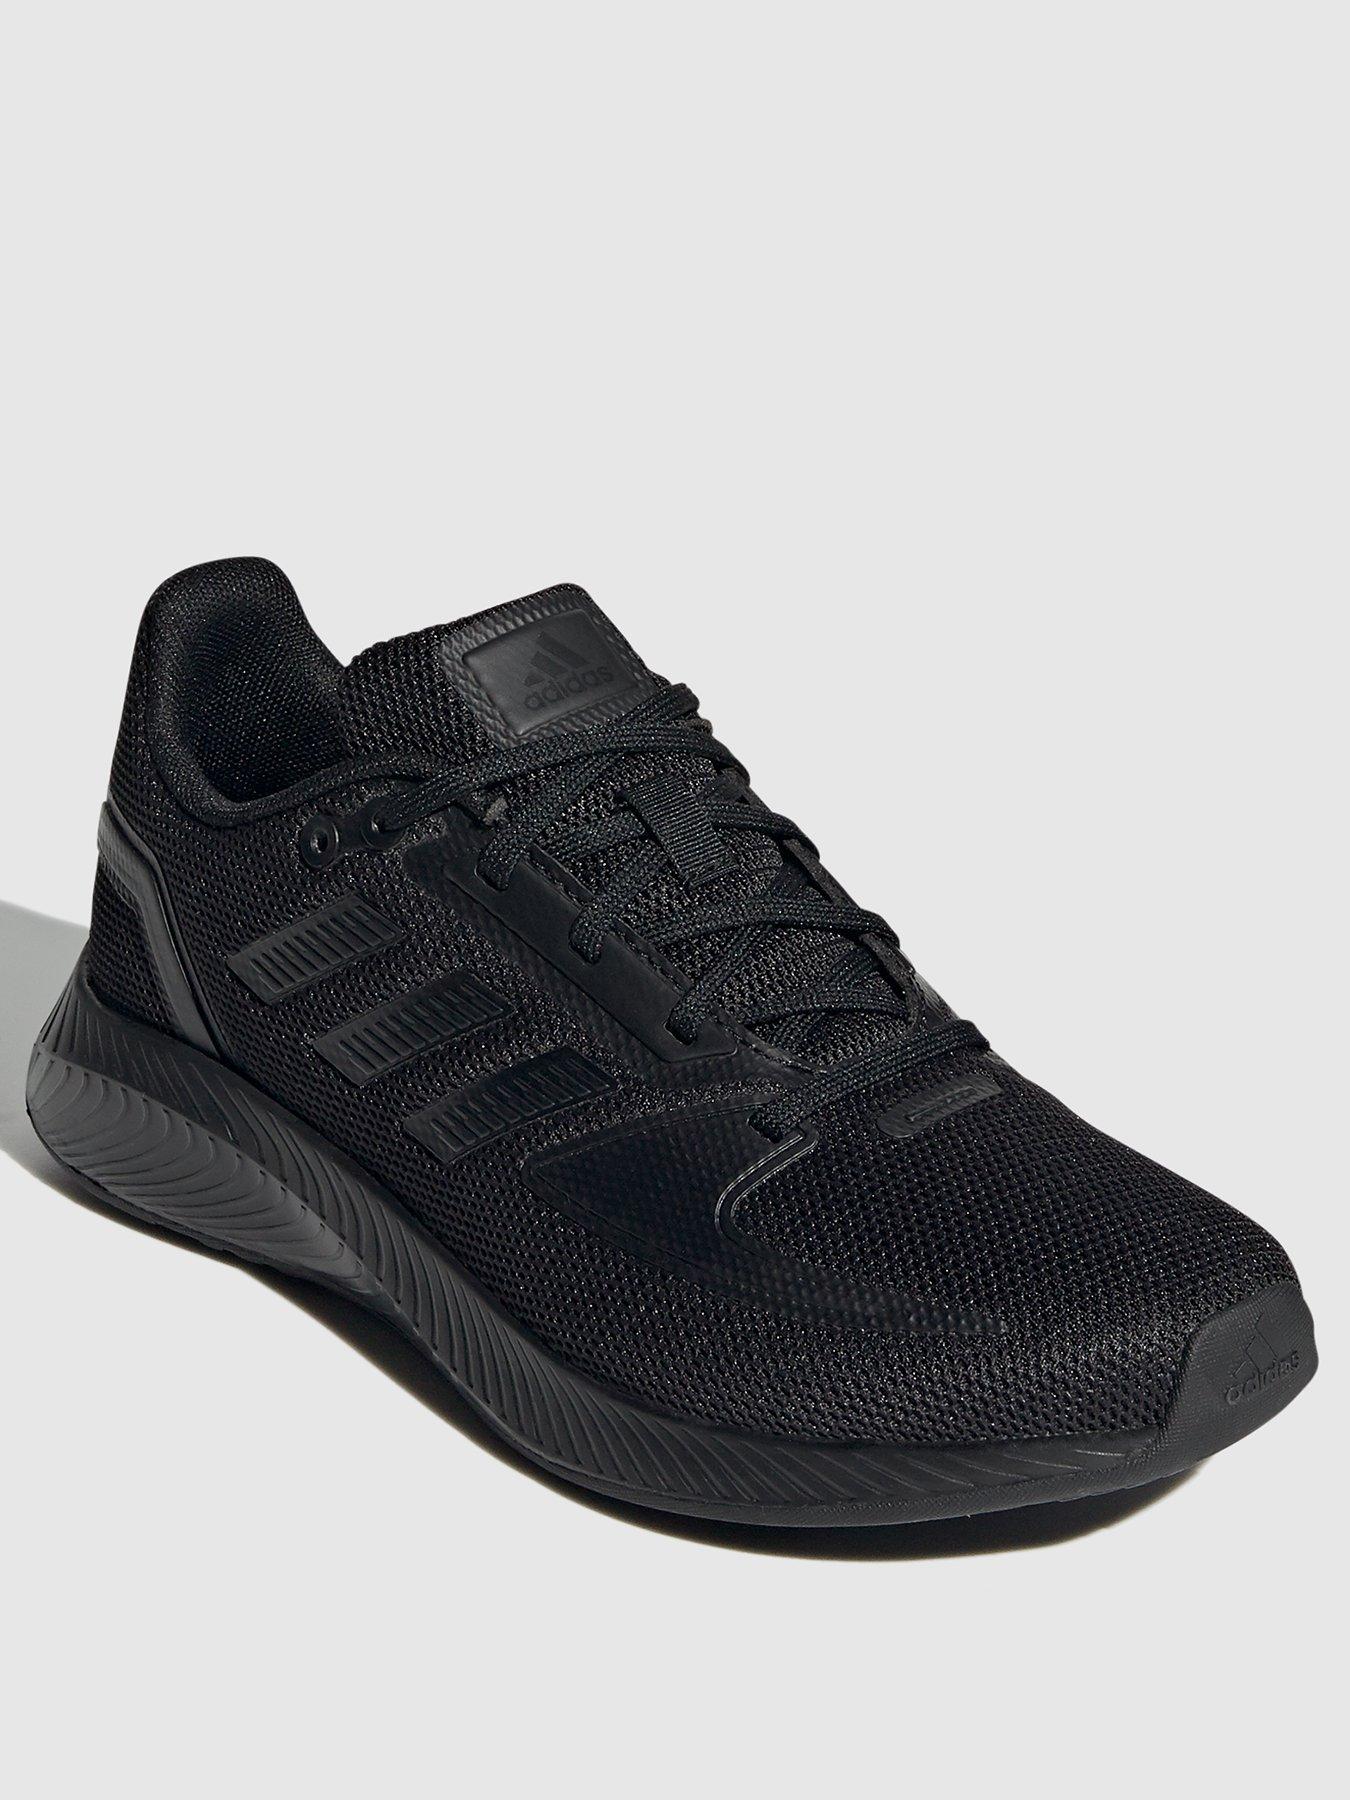 women's all black adidas trainers